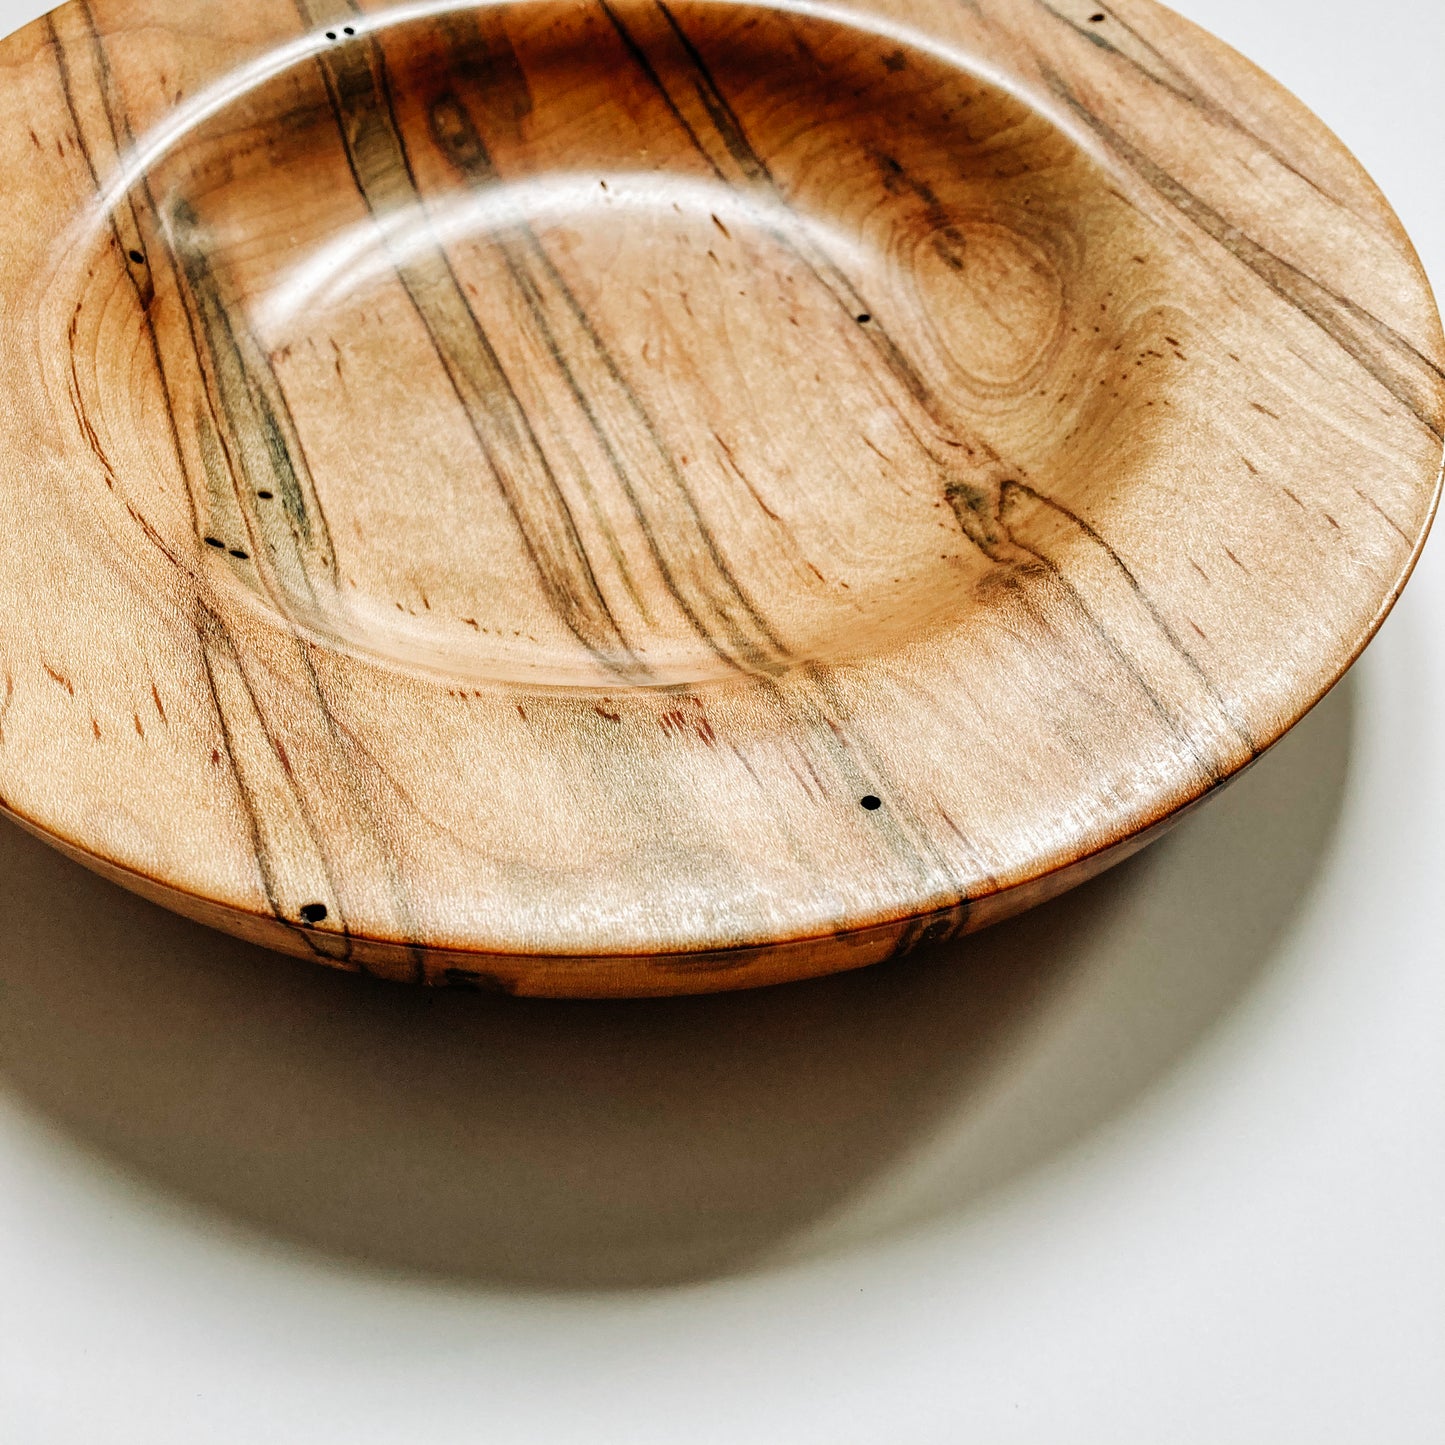 Ambrosia Maple Wooden Carved Bowl - 9 inches by John Parsons Jr. Woodworking